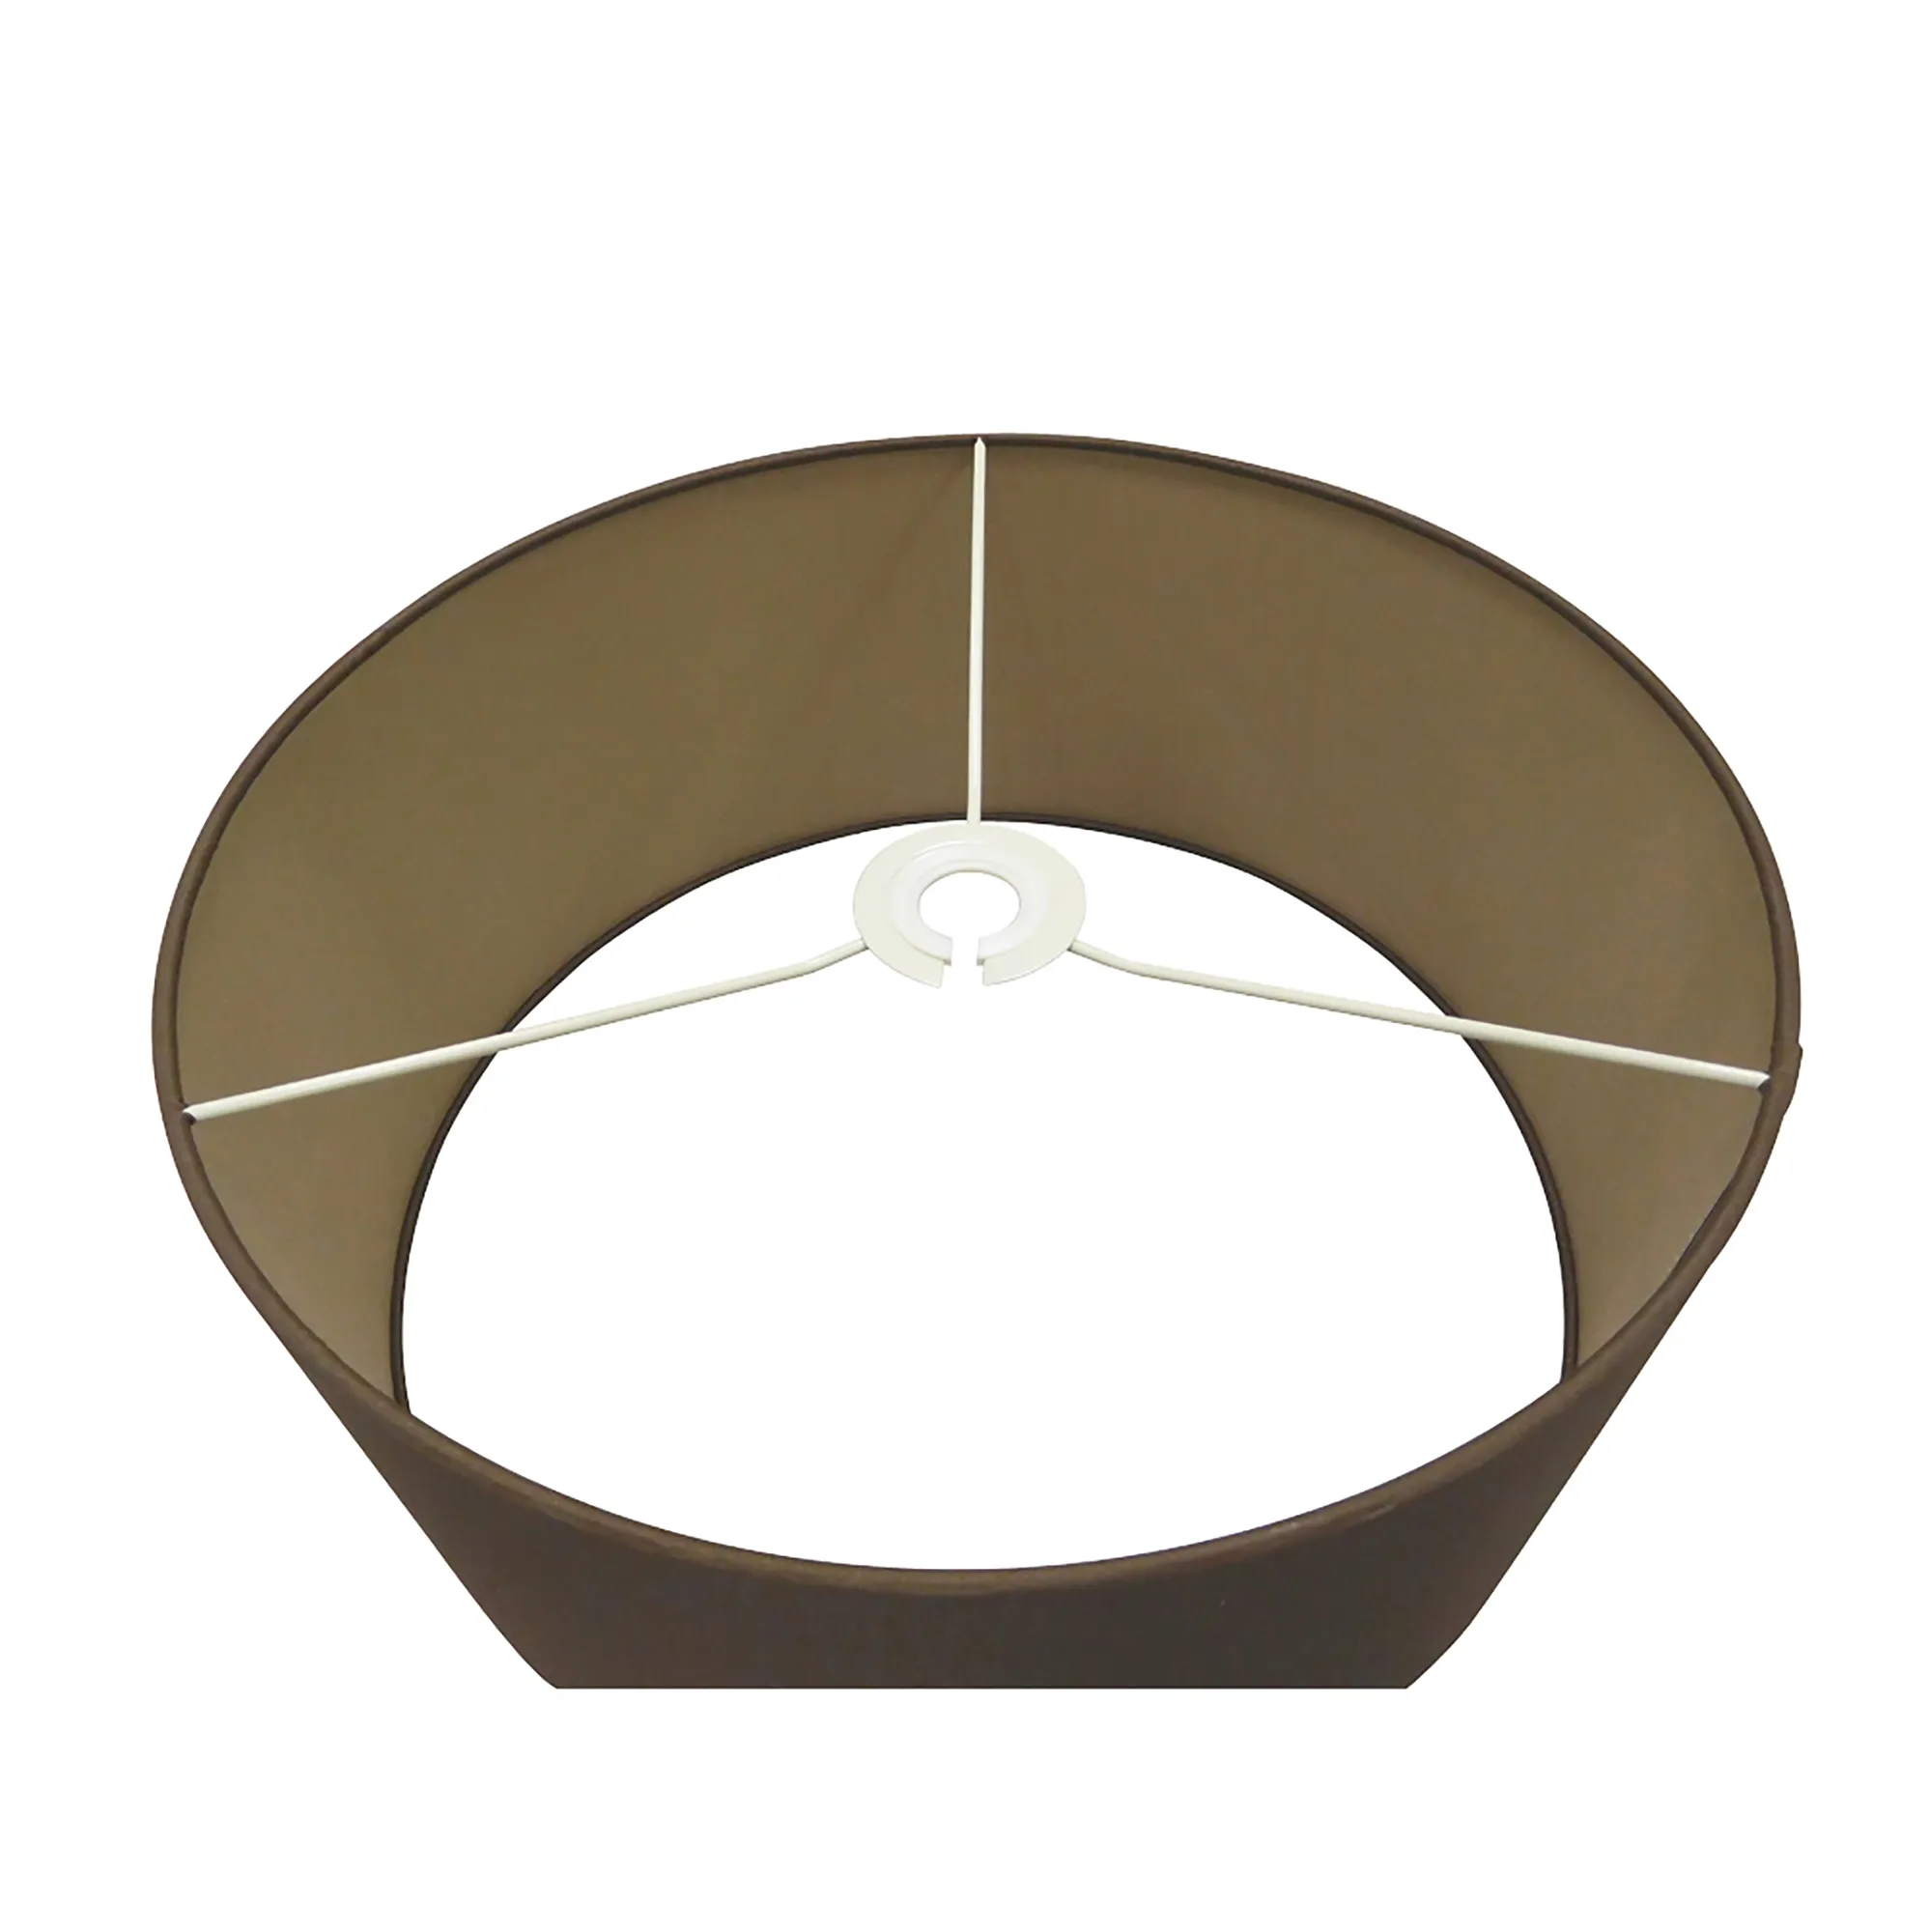 Baymont 40cm Flush 3 Light Raw Cocoa/Grecian Bronze, Frosted Diffuser DK0622  Deco Baymont WH RC